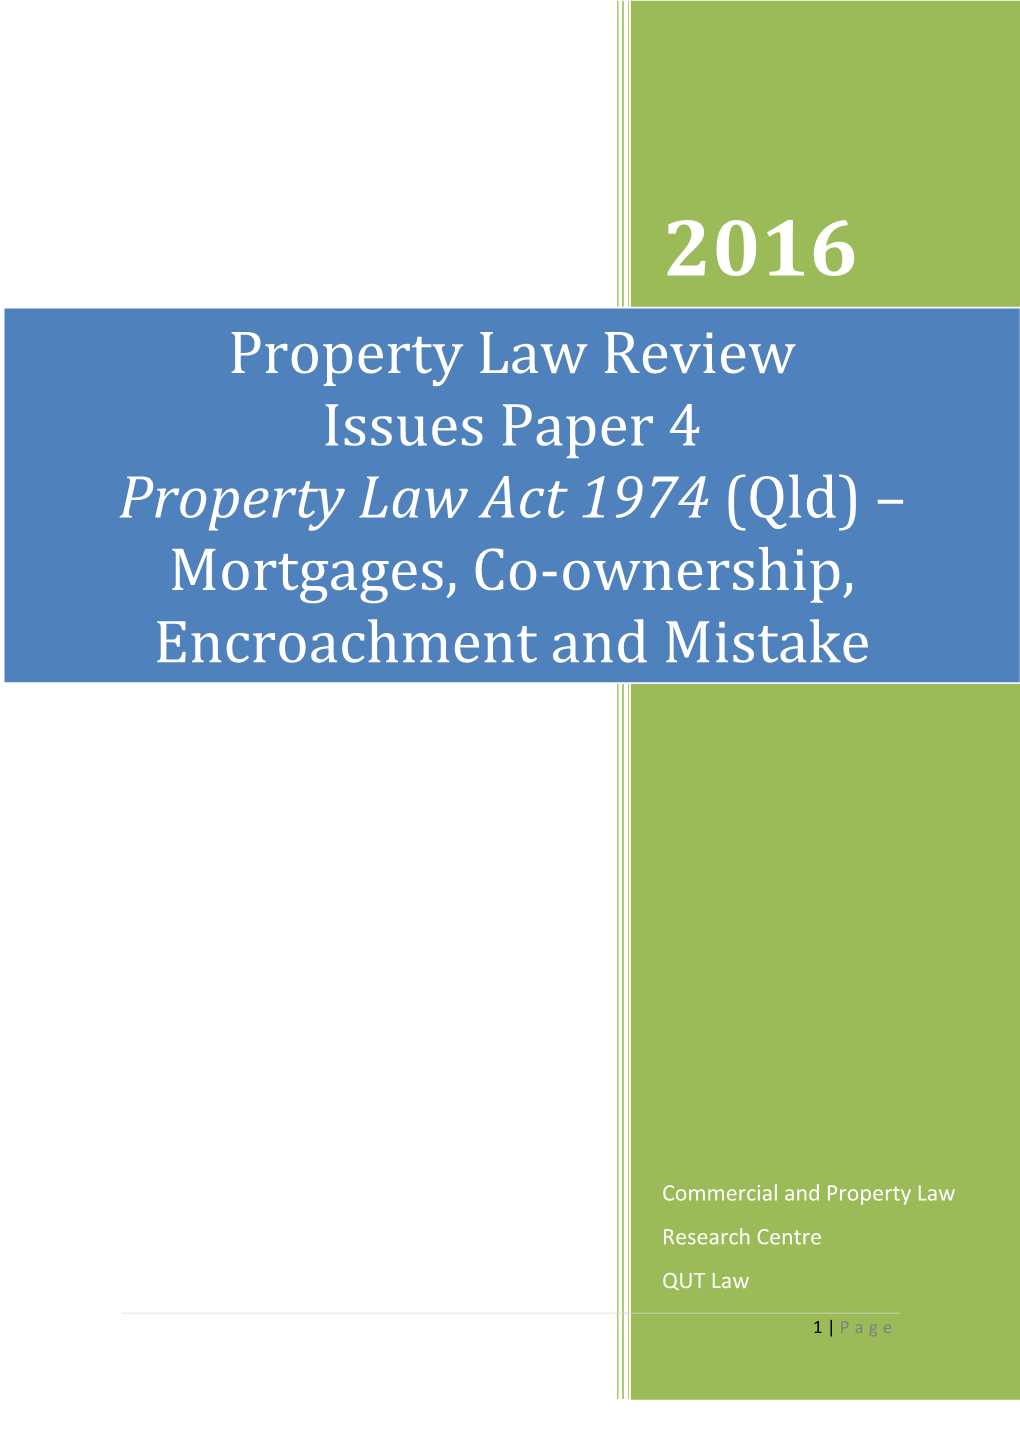 Issues Paper 4: Property Law Act 1974 (Qld)